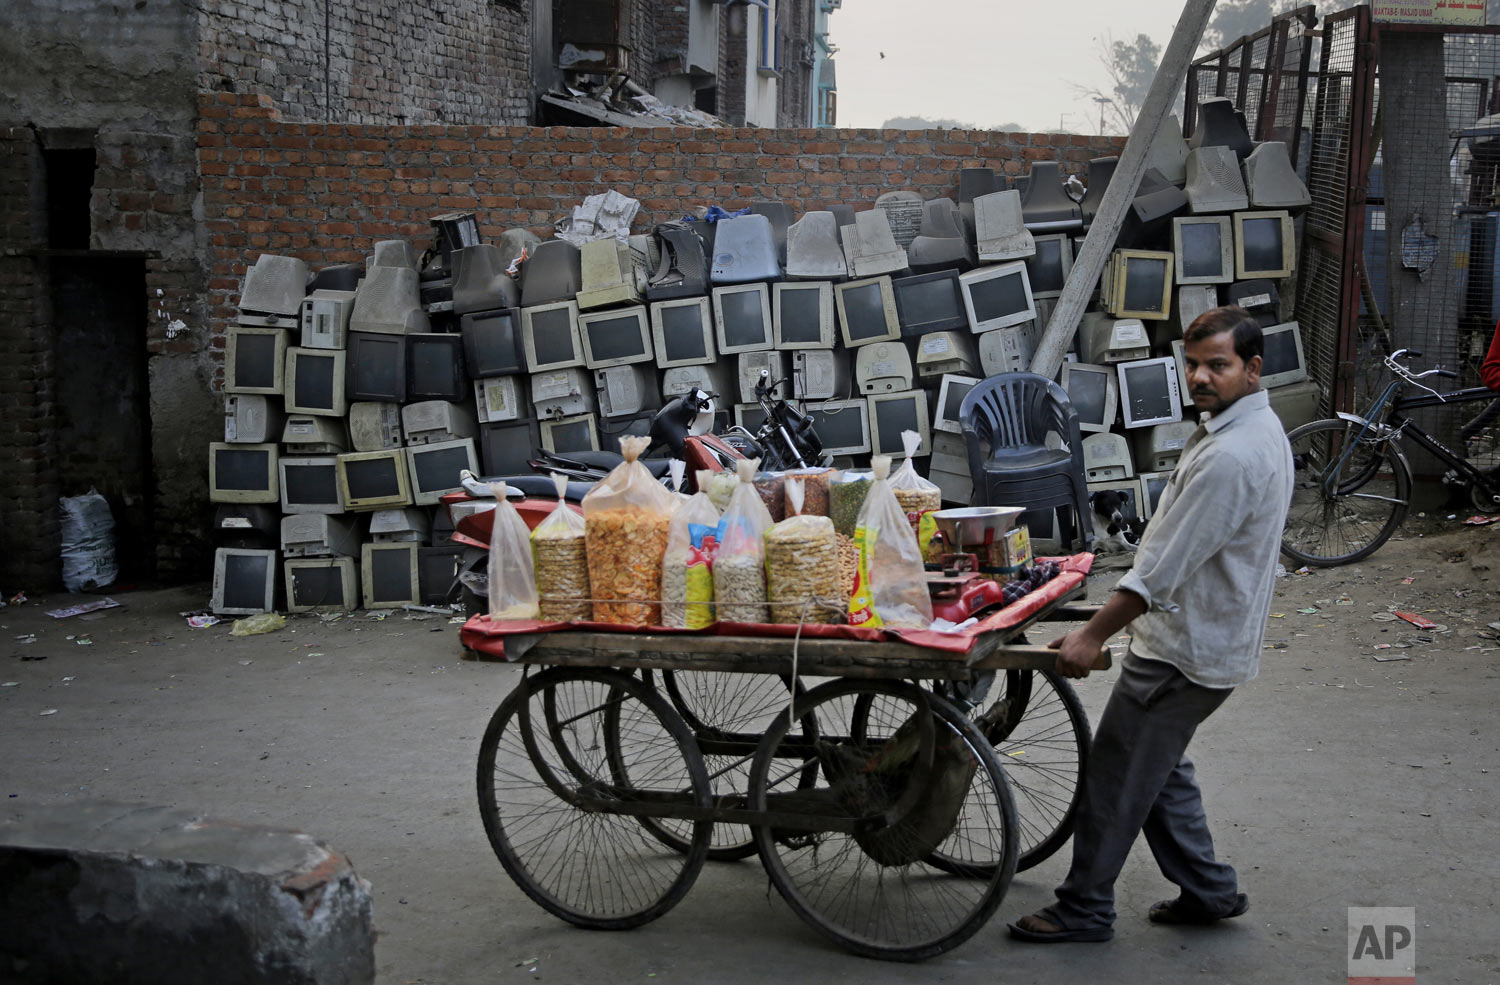  A snack vendor pushes his cart past discarded computer monitors stacked next to a wall on the side of a road in New Delhi, India, on Saturday, Dec. 8, 2018. (AP Photo/Altaf Qadri) 